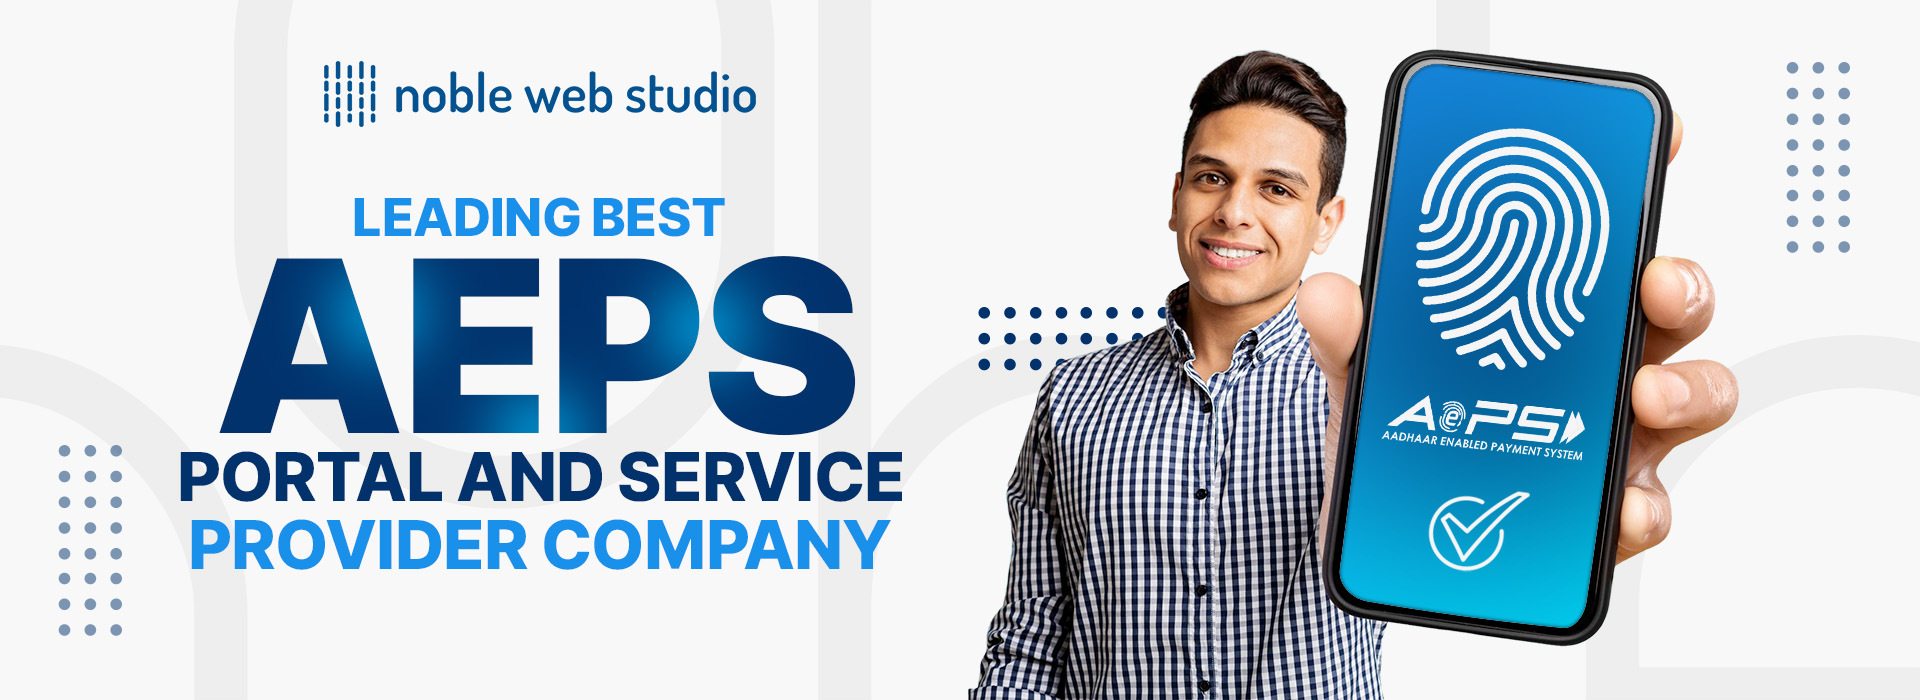 Leading best AEPS portal and service provider company